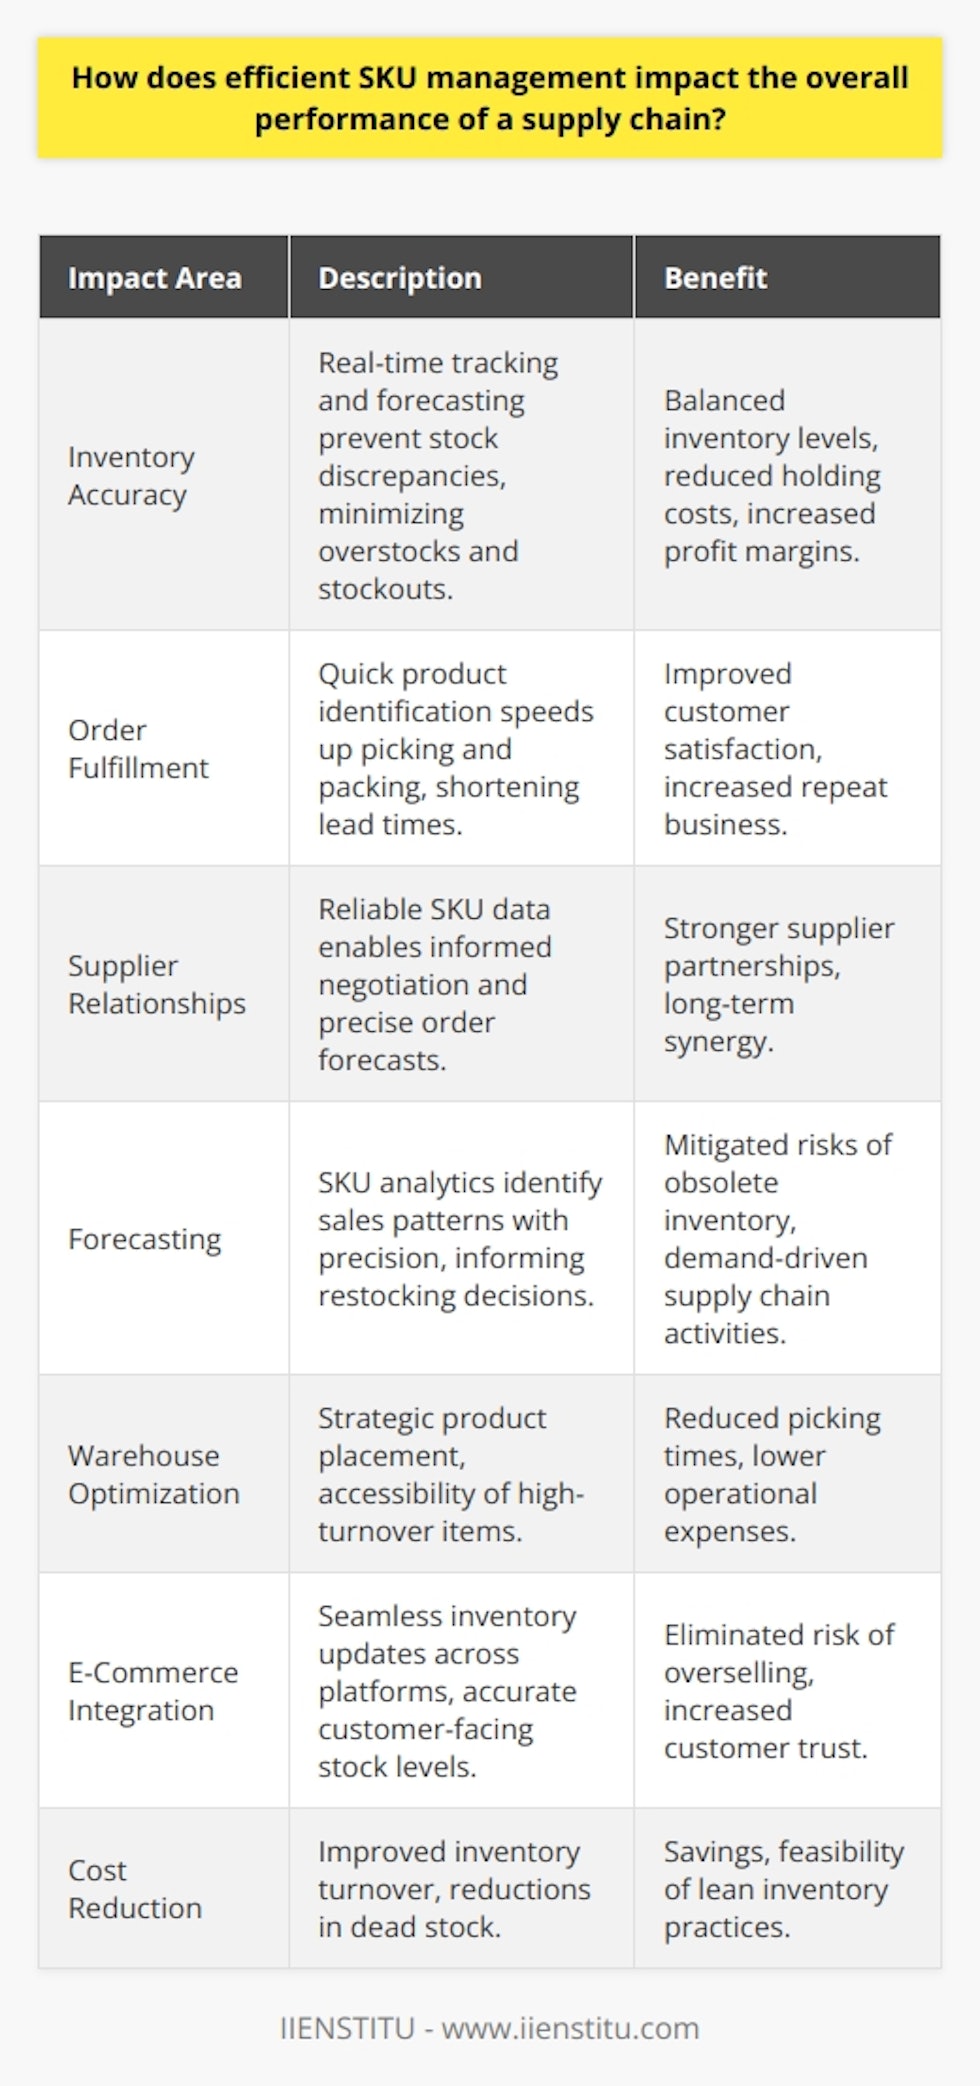 Efficient SKU Management and Supply Chain Performance Understanding SKU Management Stock Keeping Units (SKU) represent unique identifiers for products. Effective SKU management demands accurate tracking and forecasting. It becomes the backbone of supply chain efficiency. SKU management aligns inventory with demand. Impact on Inventory Accuracy SKU management enhances inventory precision. Real-time tracking prevents stock discrepancies. Accurate inventory levels minimize overstocks and stockouts. This balance reduces holding costs. It also raises profit margins. Improved Order Fulfillment Efficient SKU management streamlines order fulfillment. Quick product identification speeds picking and packing. It shortens lead times.  Customer satisfaction  rises as a result. Repeat business often follows. Enhanced Supplier Relationships Reliable SKU data fosters stronger supplier ties. It enables informed negotiation. Suppliers benefit from precise order forecasts. Long-term partnerships often develop from such synergy. Data-Driven Forecasting SKU analytics power forecasting accuracy. They identify sales patterns with precision. This data informs restocking decisions. It mitigates the risks of obsolete inventory. Demand-driven supply chain activities ensue. Warehouse Optimization Effective SKU management leads to optimized warehousing. It supports strategic product placement. High-turnover items become more accessible. This layout reduces picking times. It also cuts operational expenses. E-Commerce Integration Online retail thrives on seamless SKU management. It ensures inventory updates across platforms. Customer-facing stock levels remain accurate. It eliminates the risk of overselling. Customer trust depends on such reliability. Cost Reduction Efficient SKU management lowers costs. It achieves this through improved inventory turnover. Reductions in dead stock translate to savings. Lean inventory practices become feasible. Striking the Balance Achieving efficient SKU management is complex. It requires the right technology and processes. Information must flow seamlessly. Only then does the entire supply chain perform optimally.